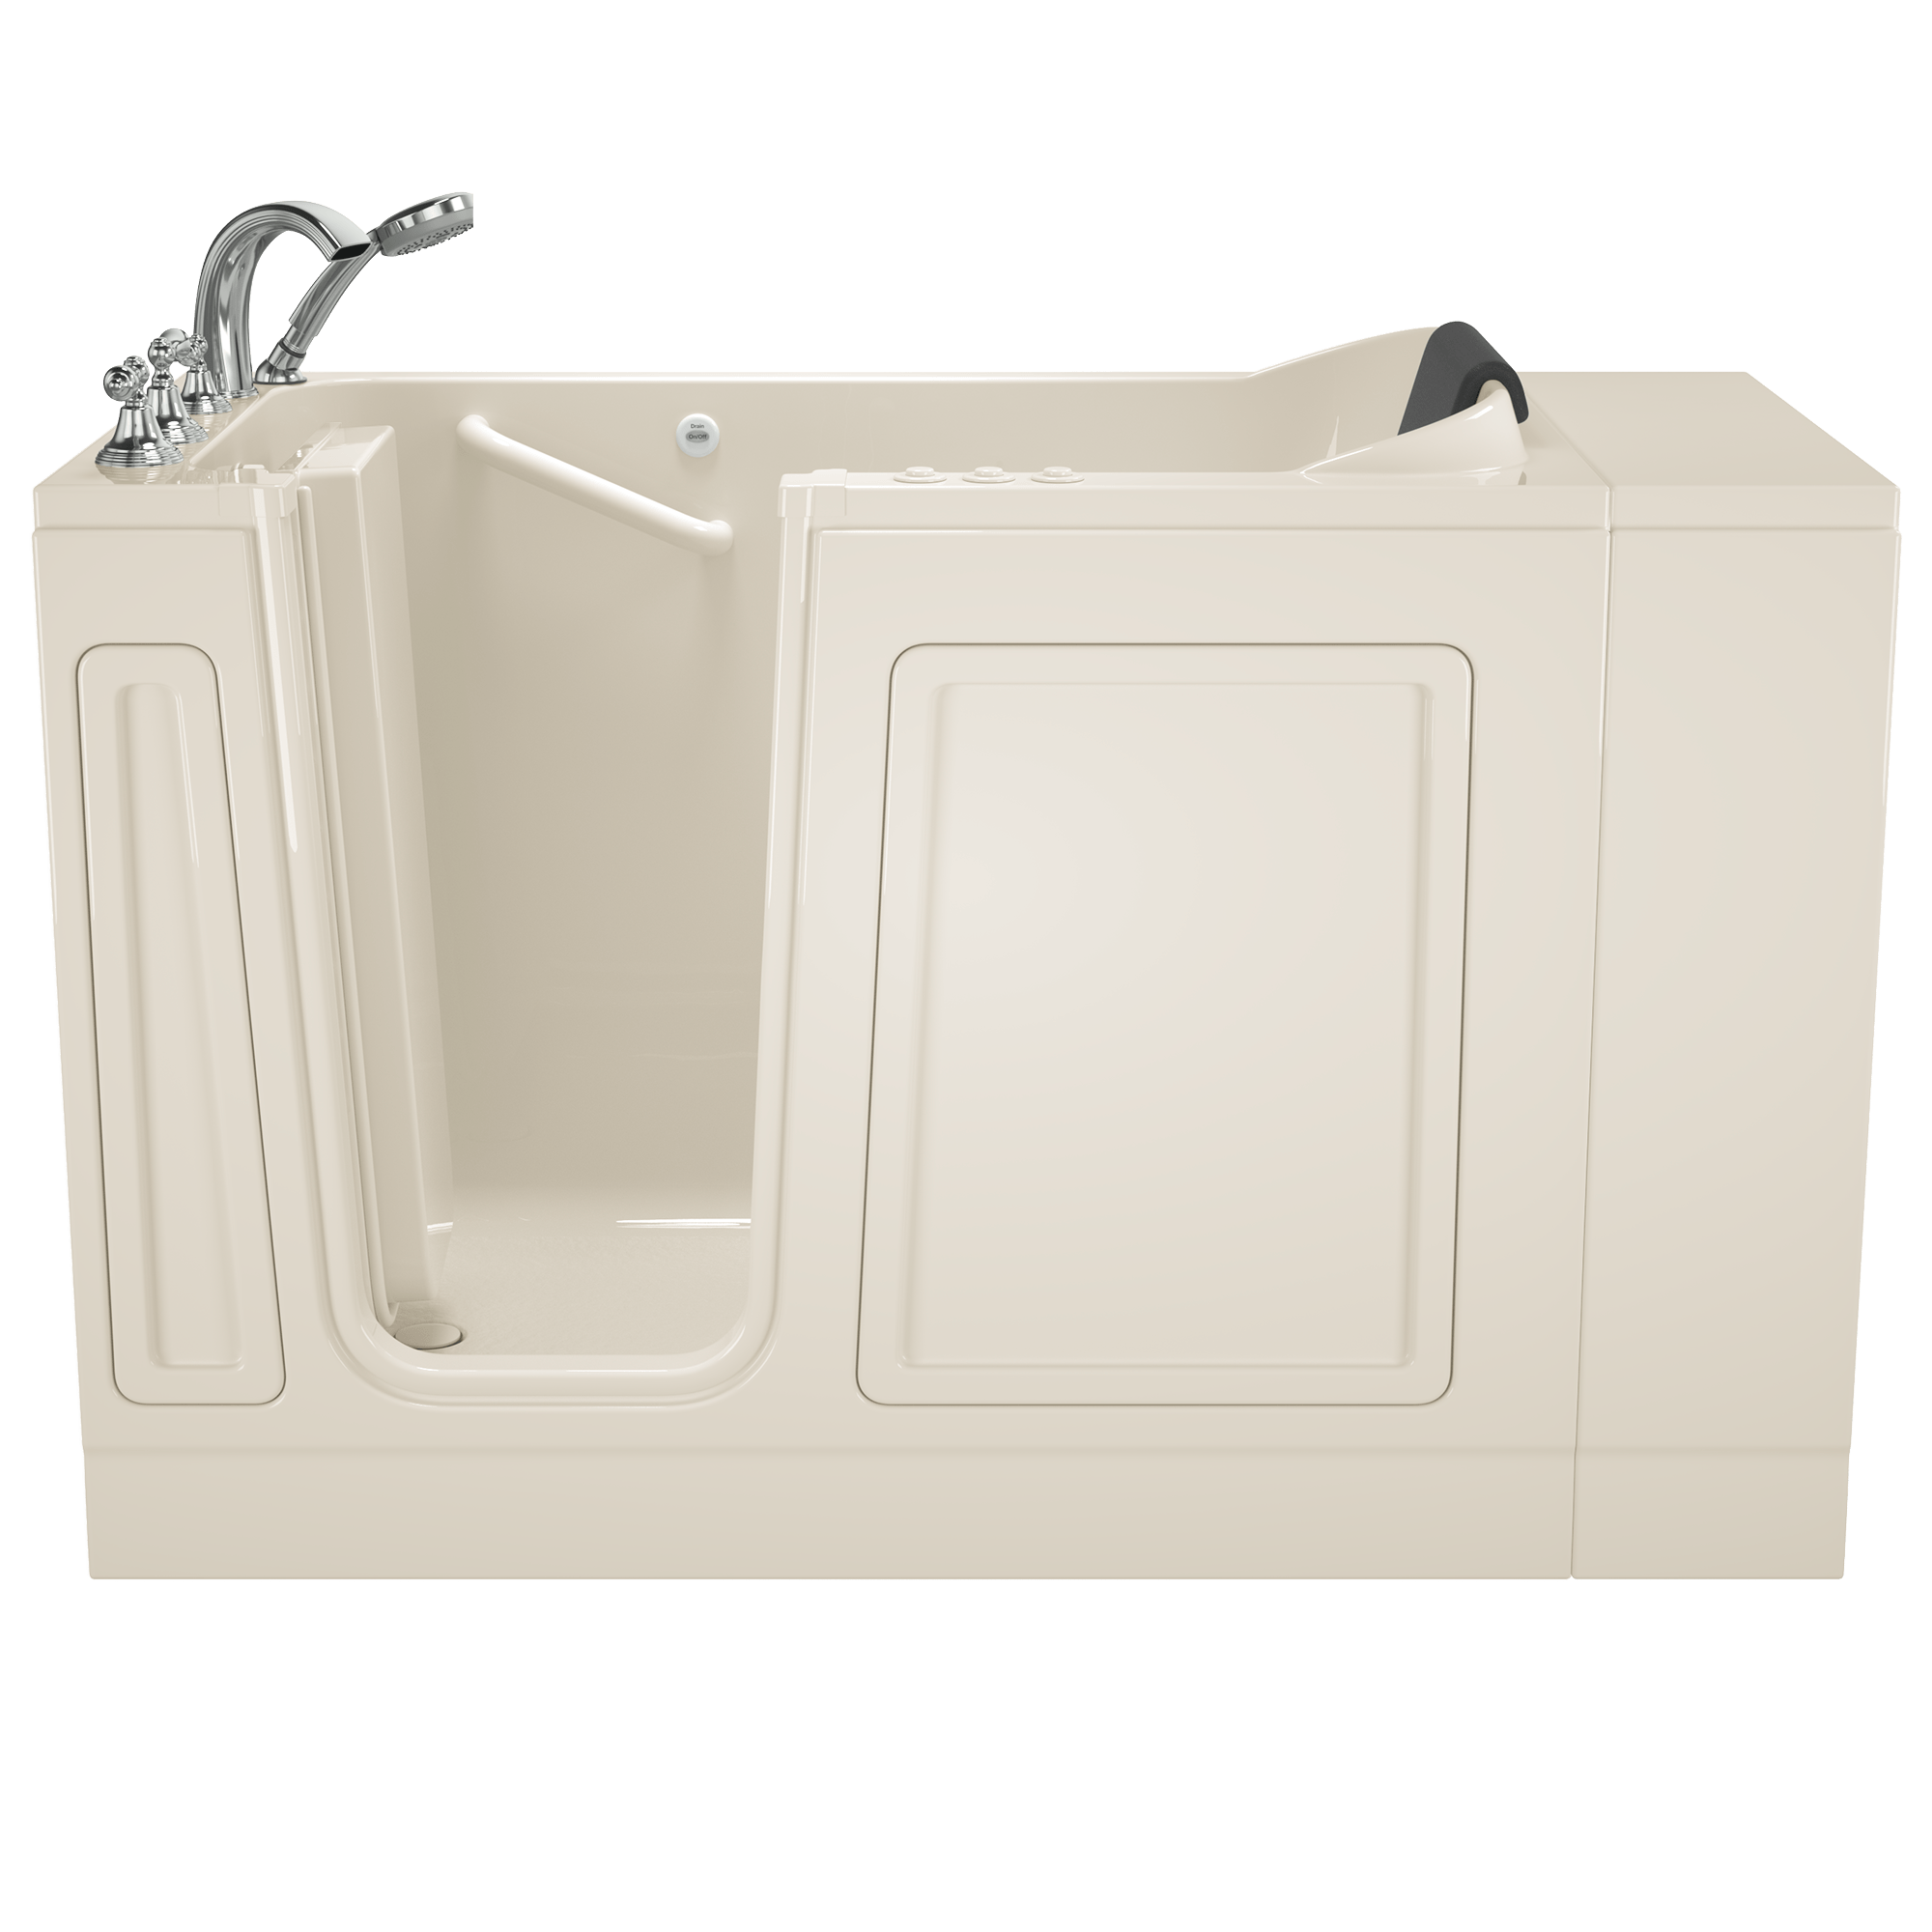 Acrylic Luxury Series 28 x 48-Inch Walk-in Tub With Combination Air Spa and Whirlpool Systems - Left-Hand Drain With Faucet